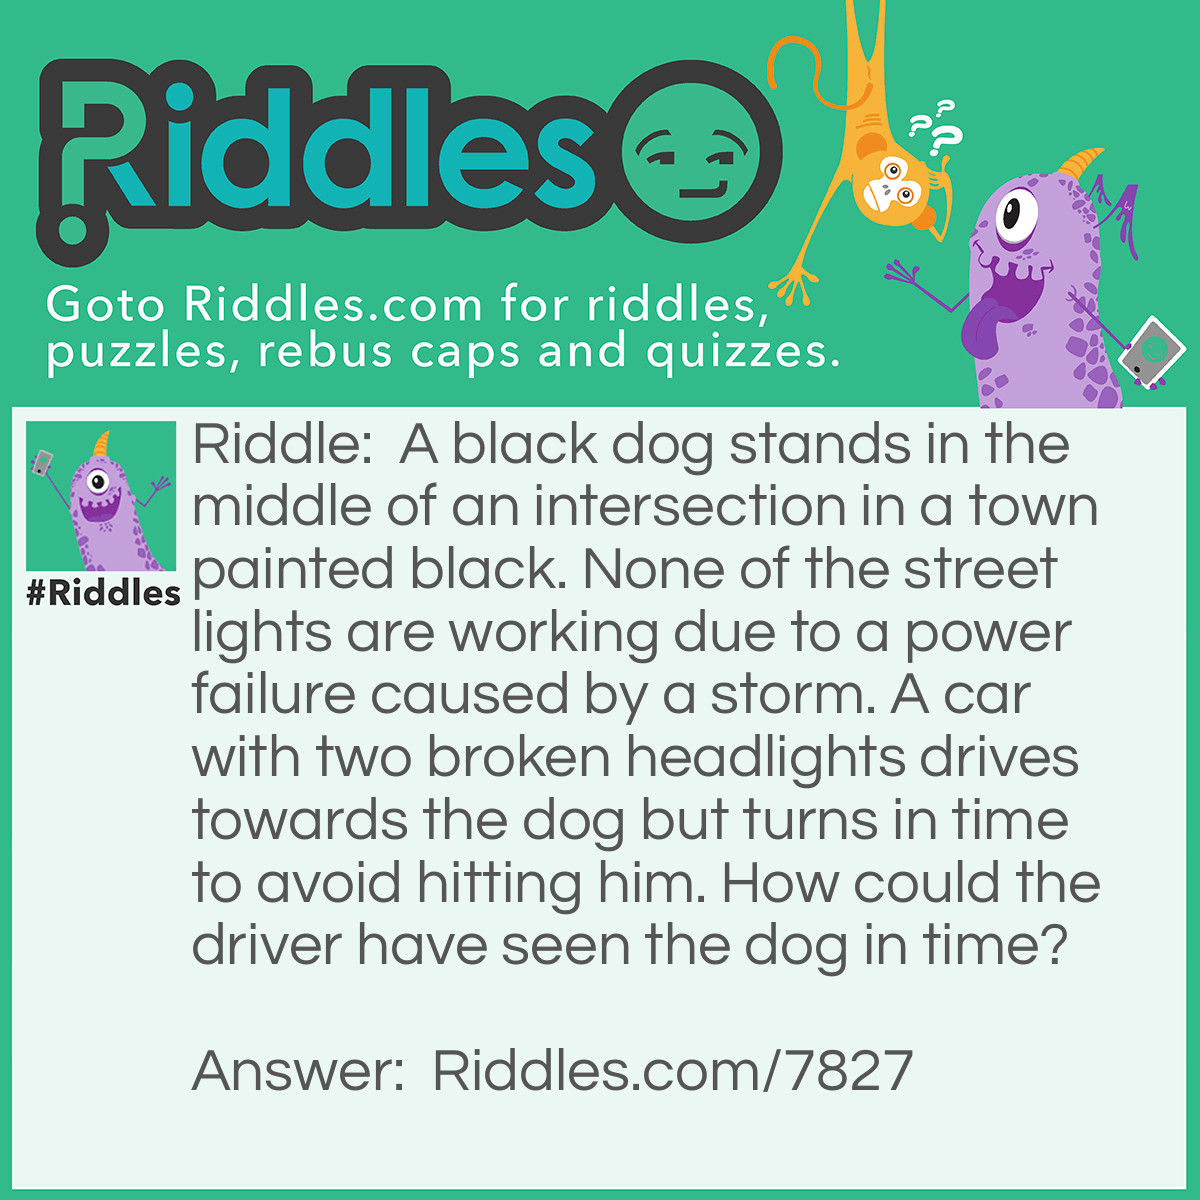 Riddle: A black dog stands in the middle of an intersection in a town painted black. None of the street lights are working due to a power failure caused by a storm. A car with two broken headlights drives towards the dog but turns in time to avoid hitting him. How could the driver have seen the dog in time? Answer: It was Daytime